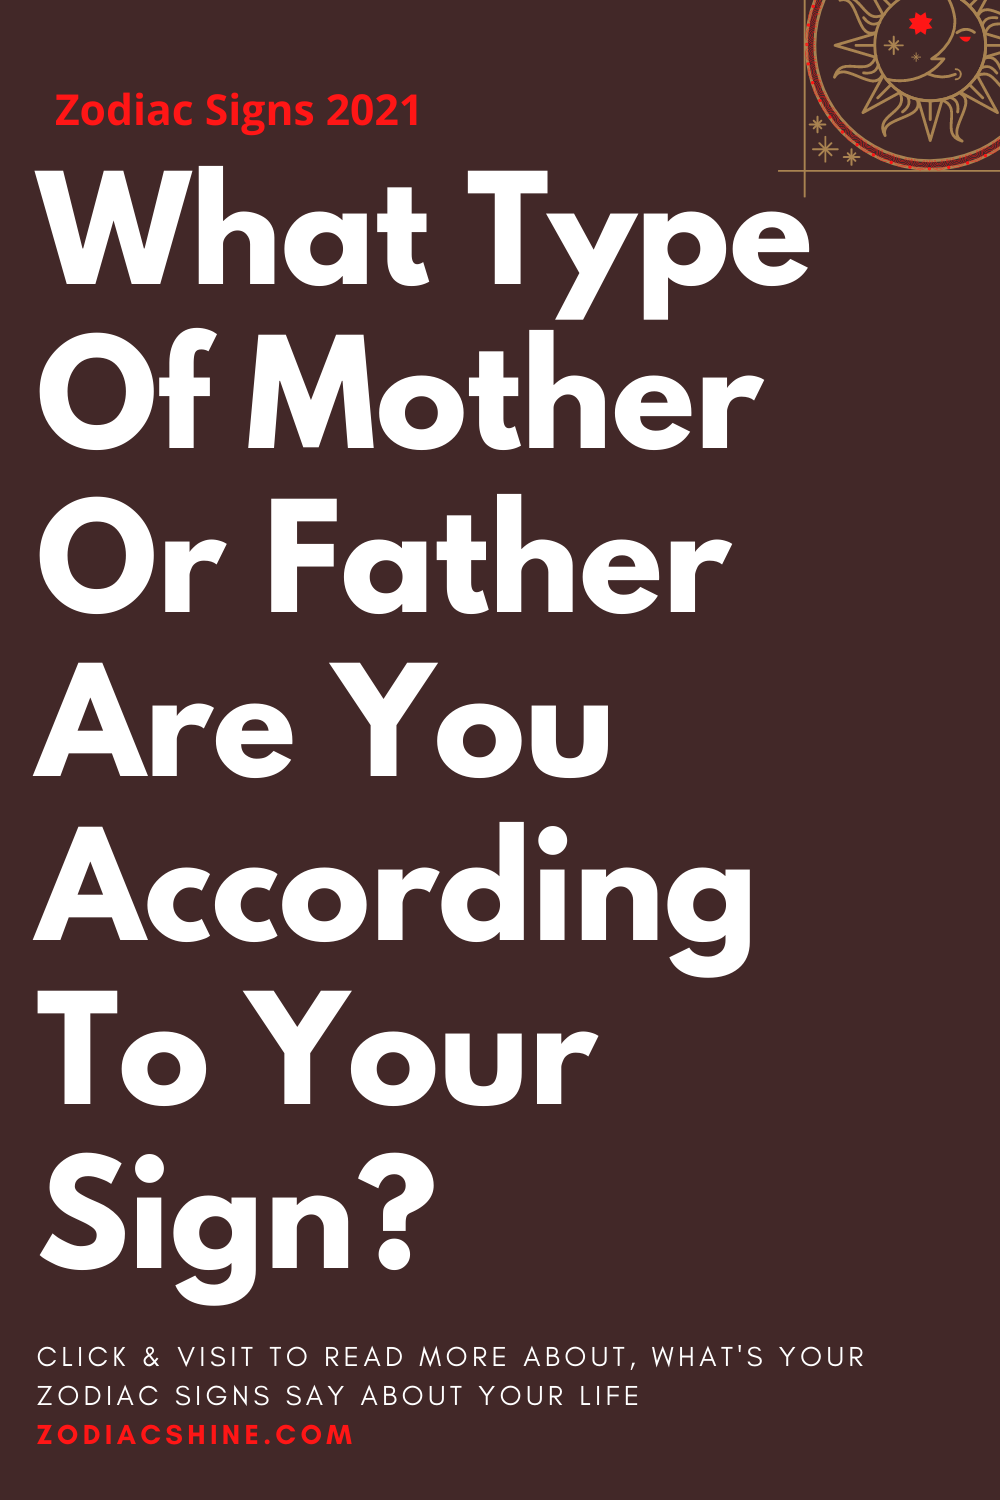 What Type Of Mother Or Father Are You According To Your Sign?